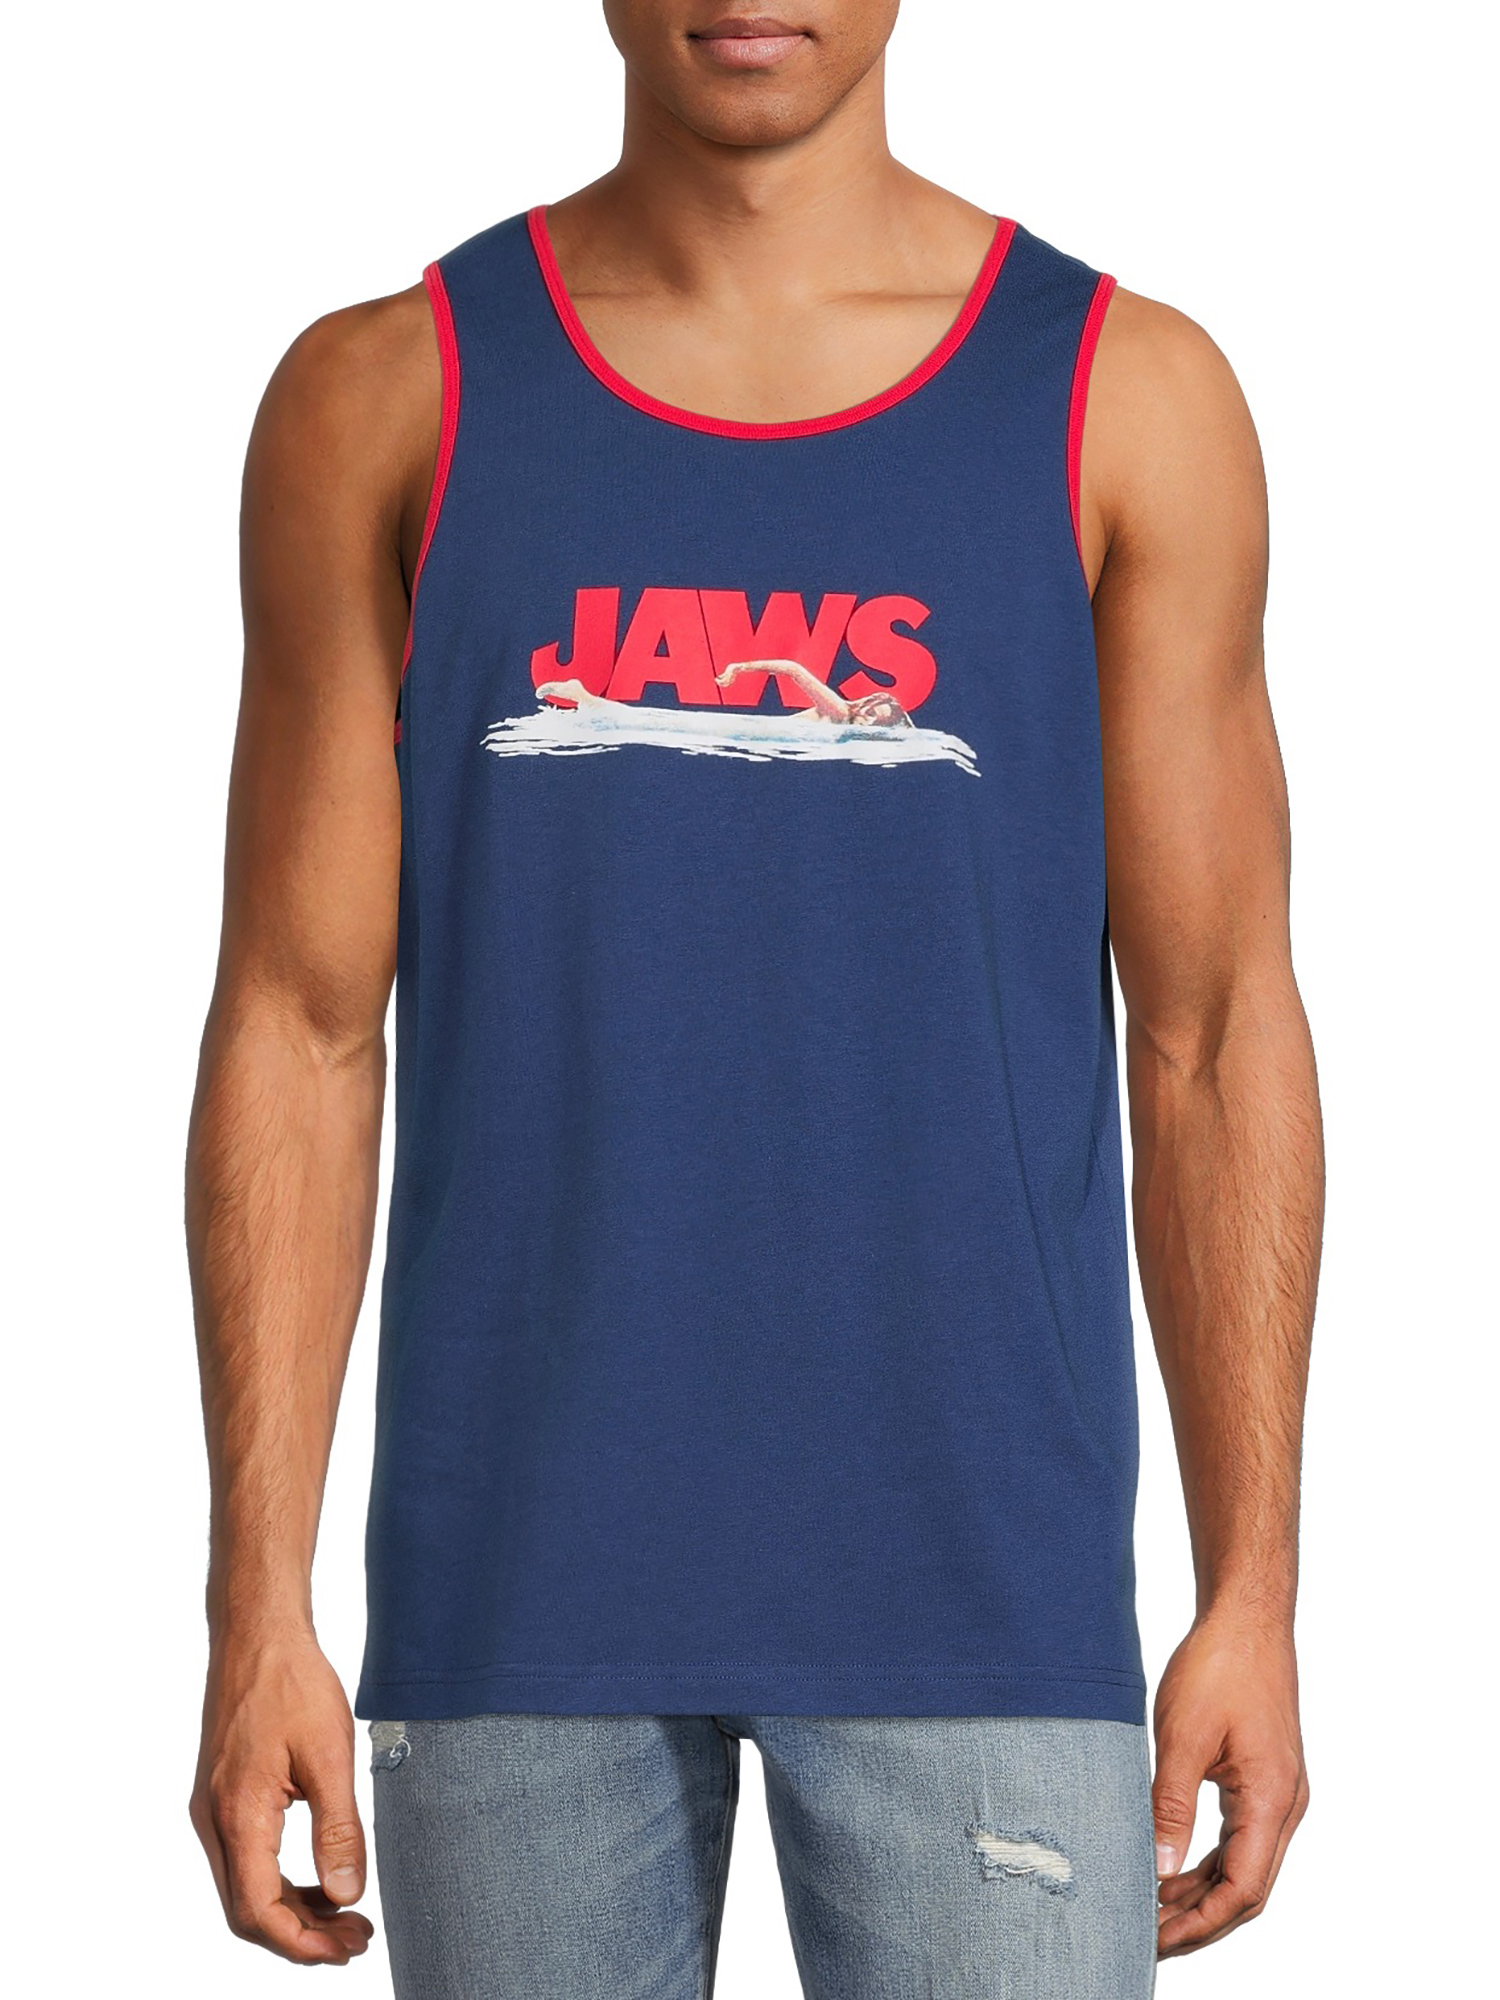 Universal by Jaws Sleeveless Graphic Print Tank Top (Men's or Men's Big & Tall) 2 Pack - image 2 of 9